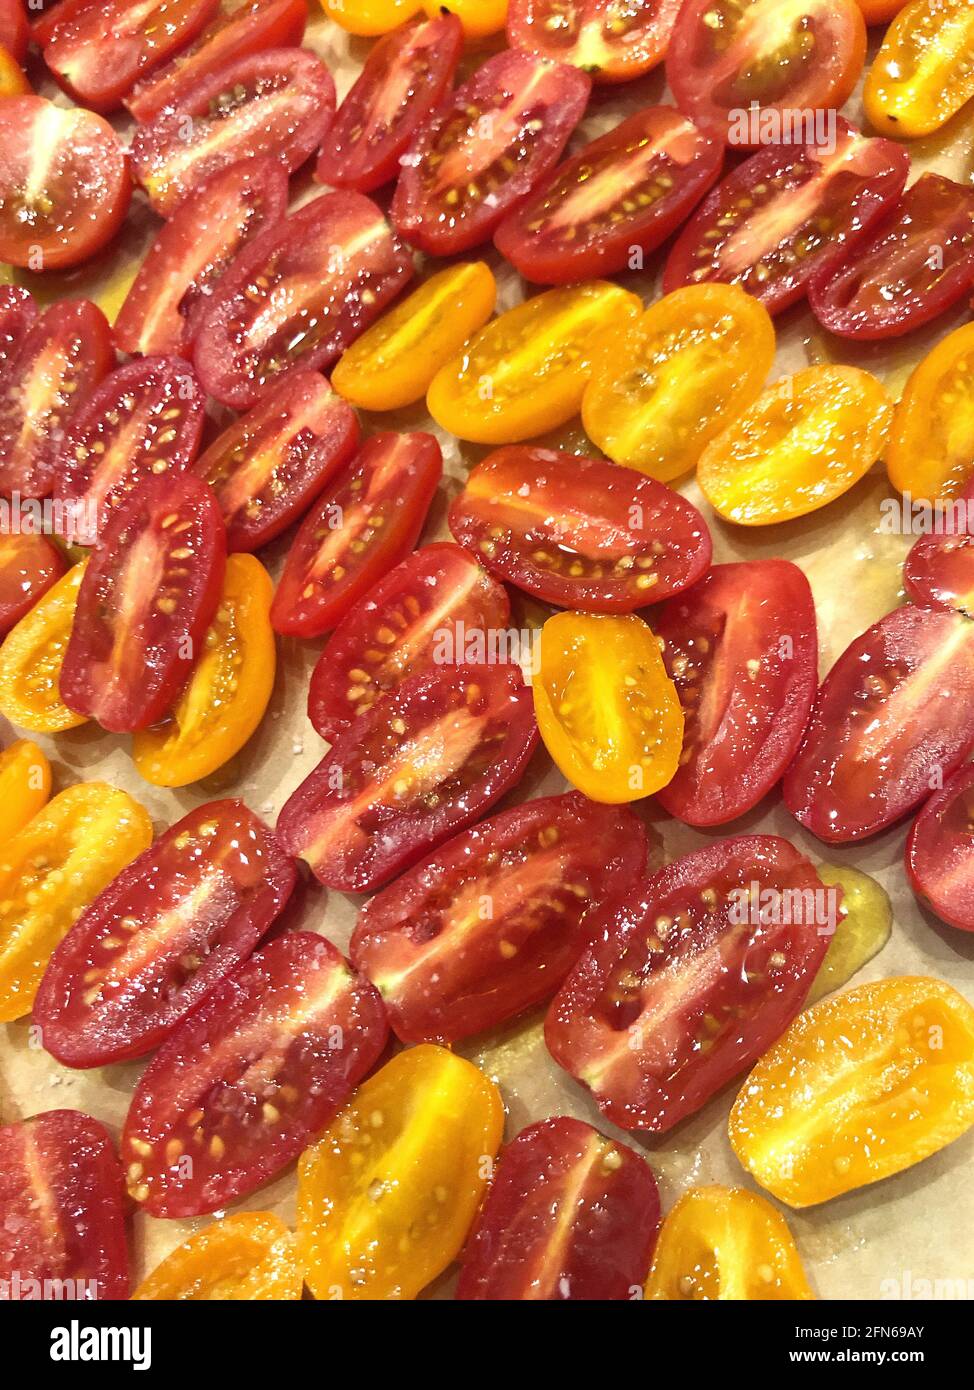 Sliced Red and Yellow Baby Tomatoes Stock Photo